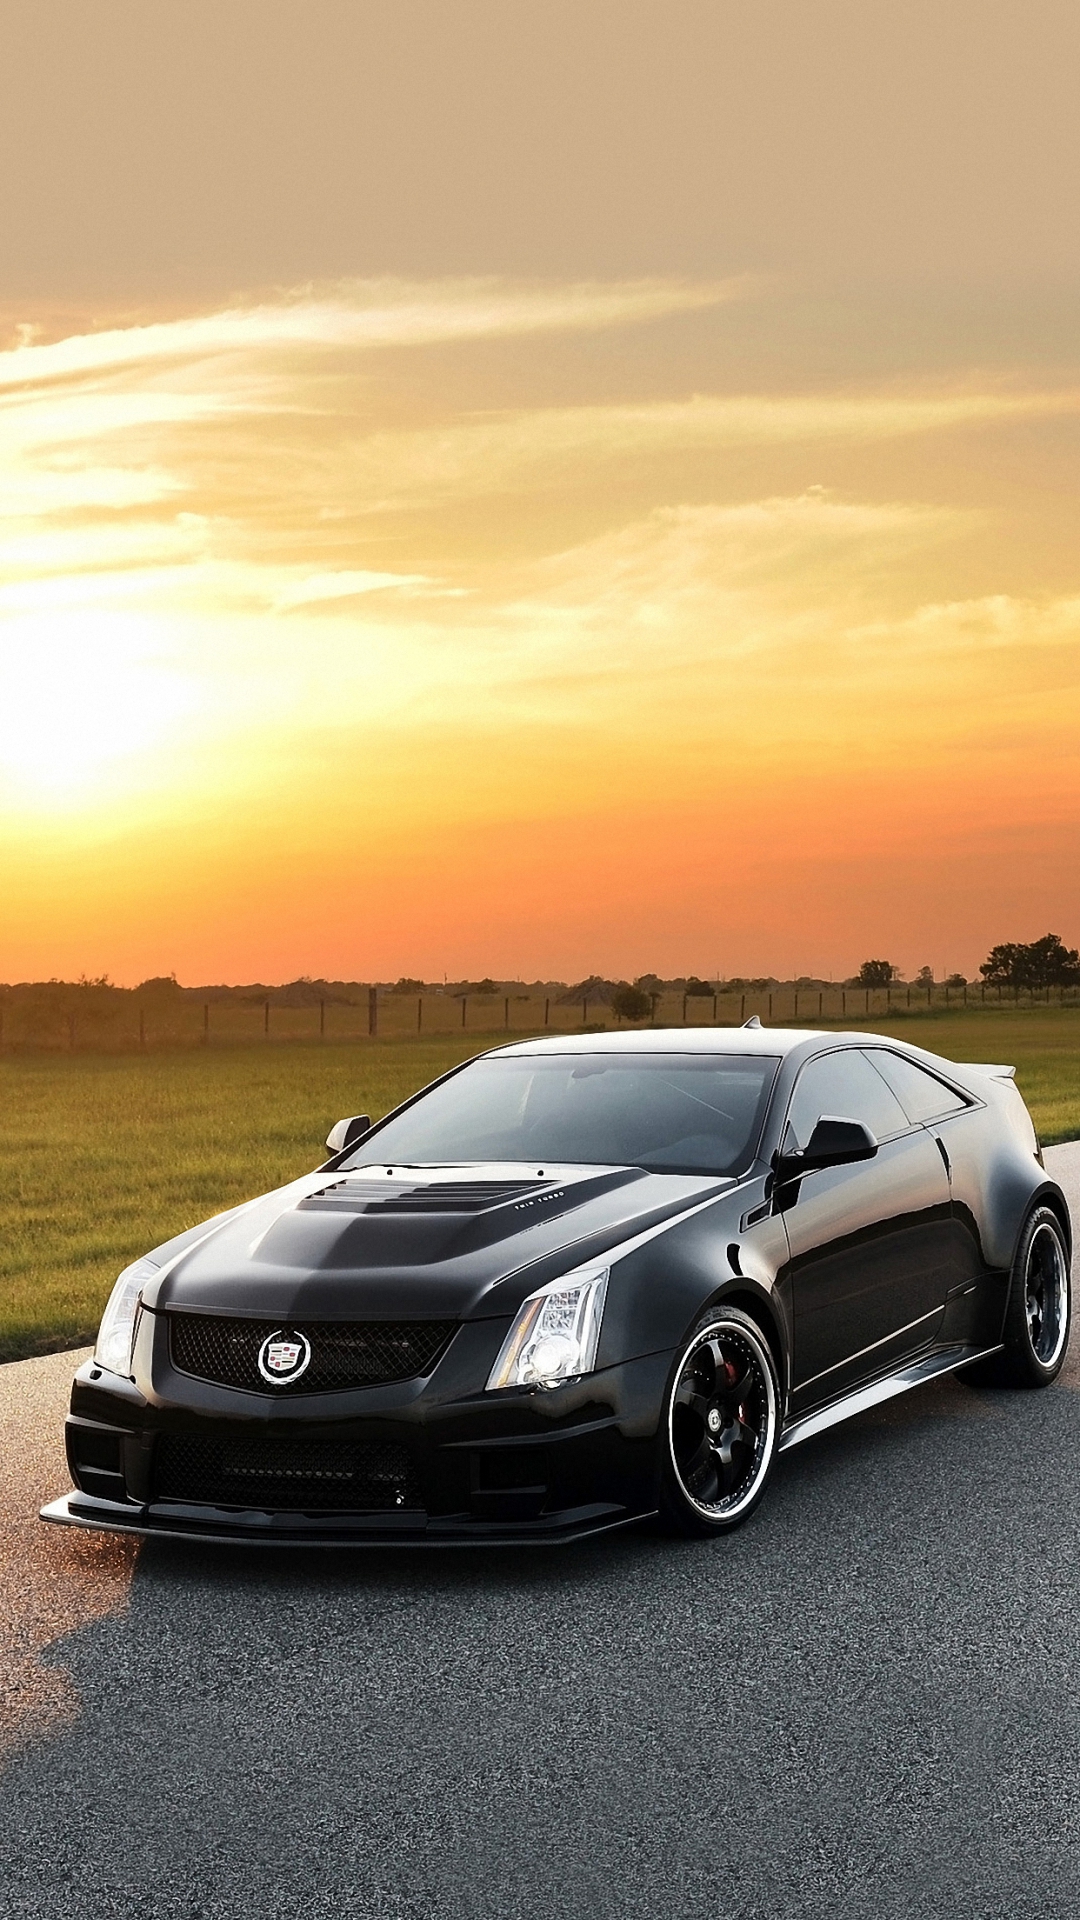 Hennessey Cadillac Car iPhone 6s Wallpaper HD